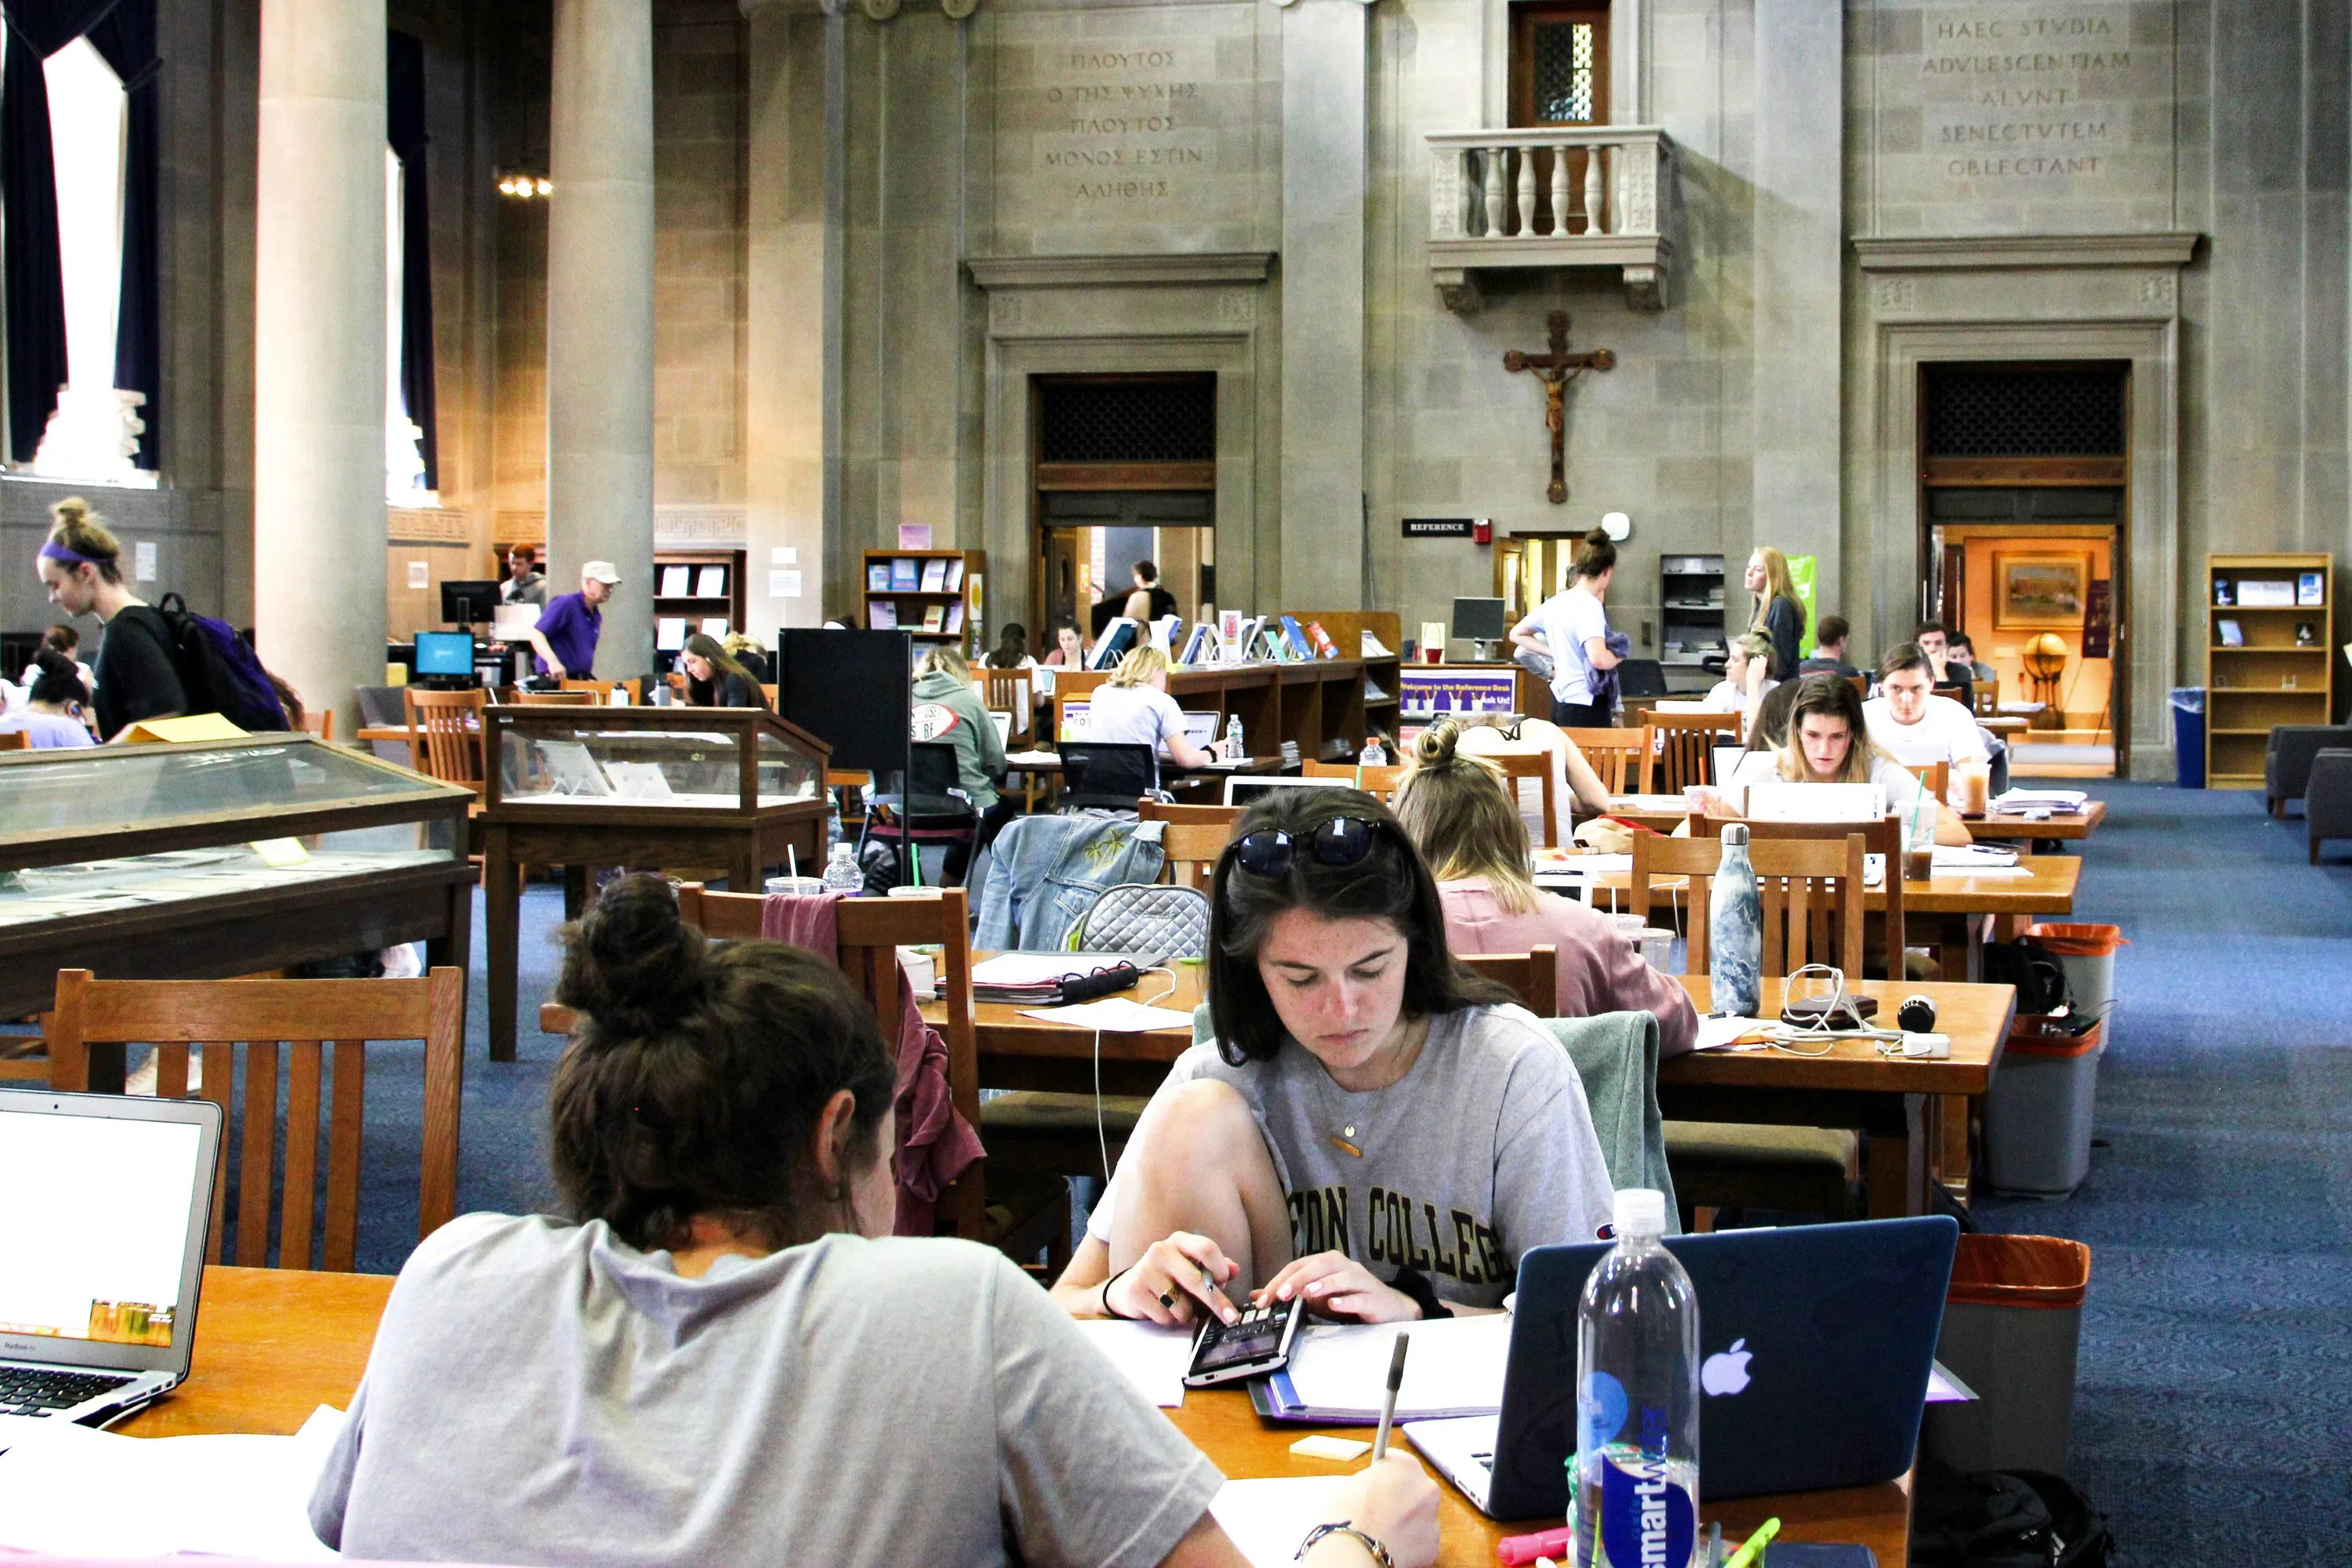 students study in large library room